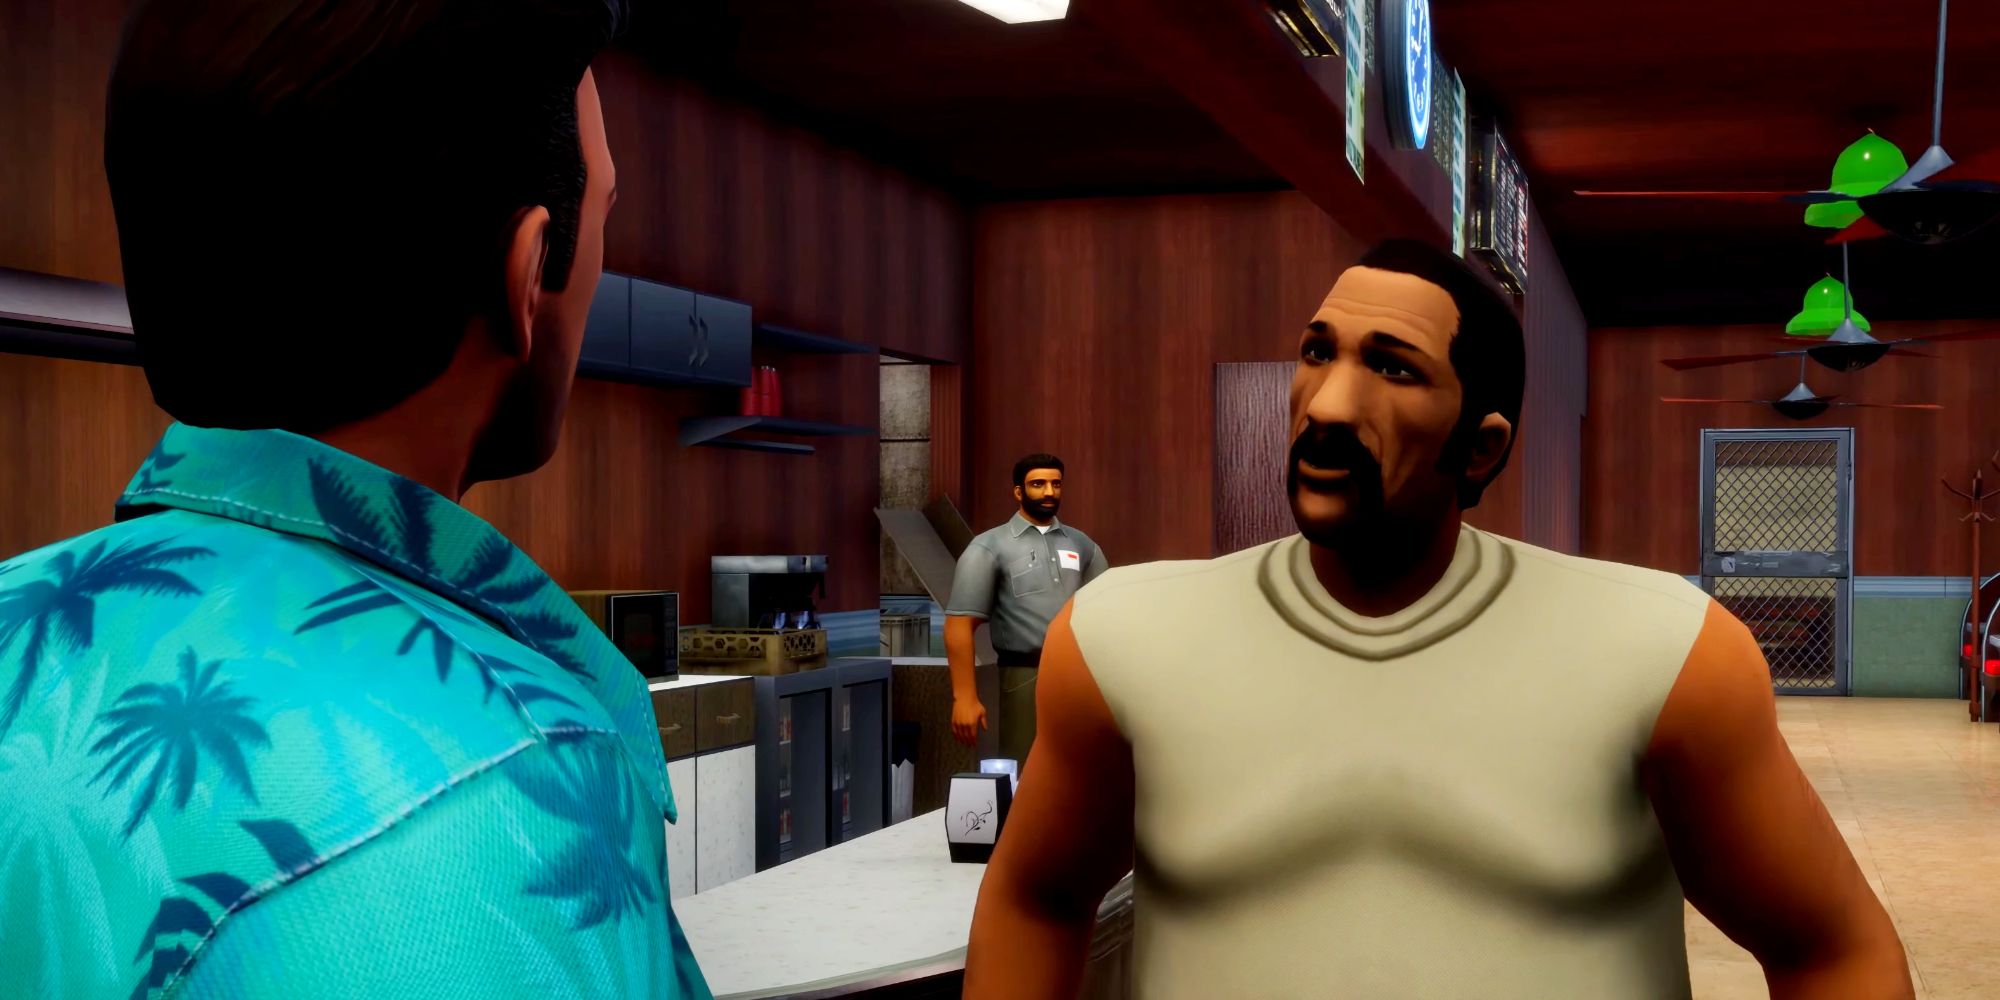 Grand Theft Auto 6 can bring back Danny Trejo's Umberto Robina since it is set in Vice City.